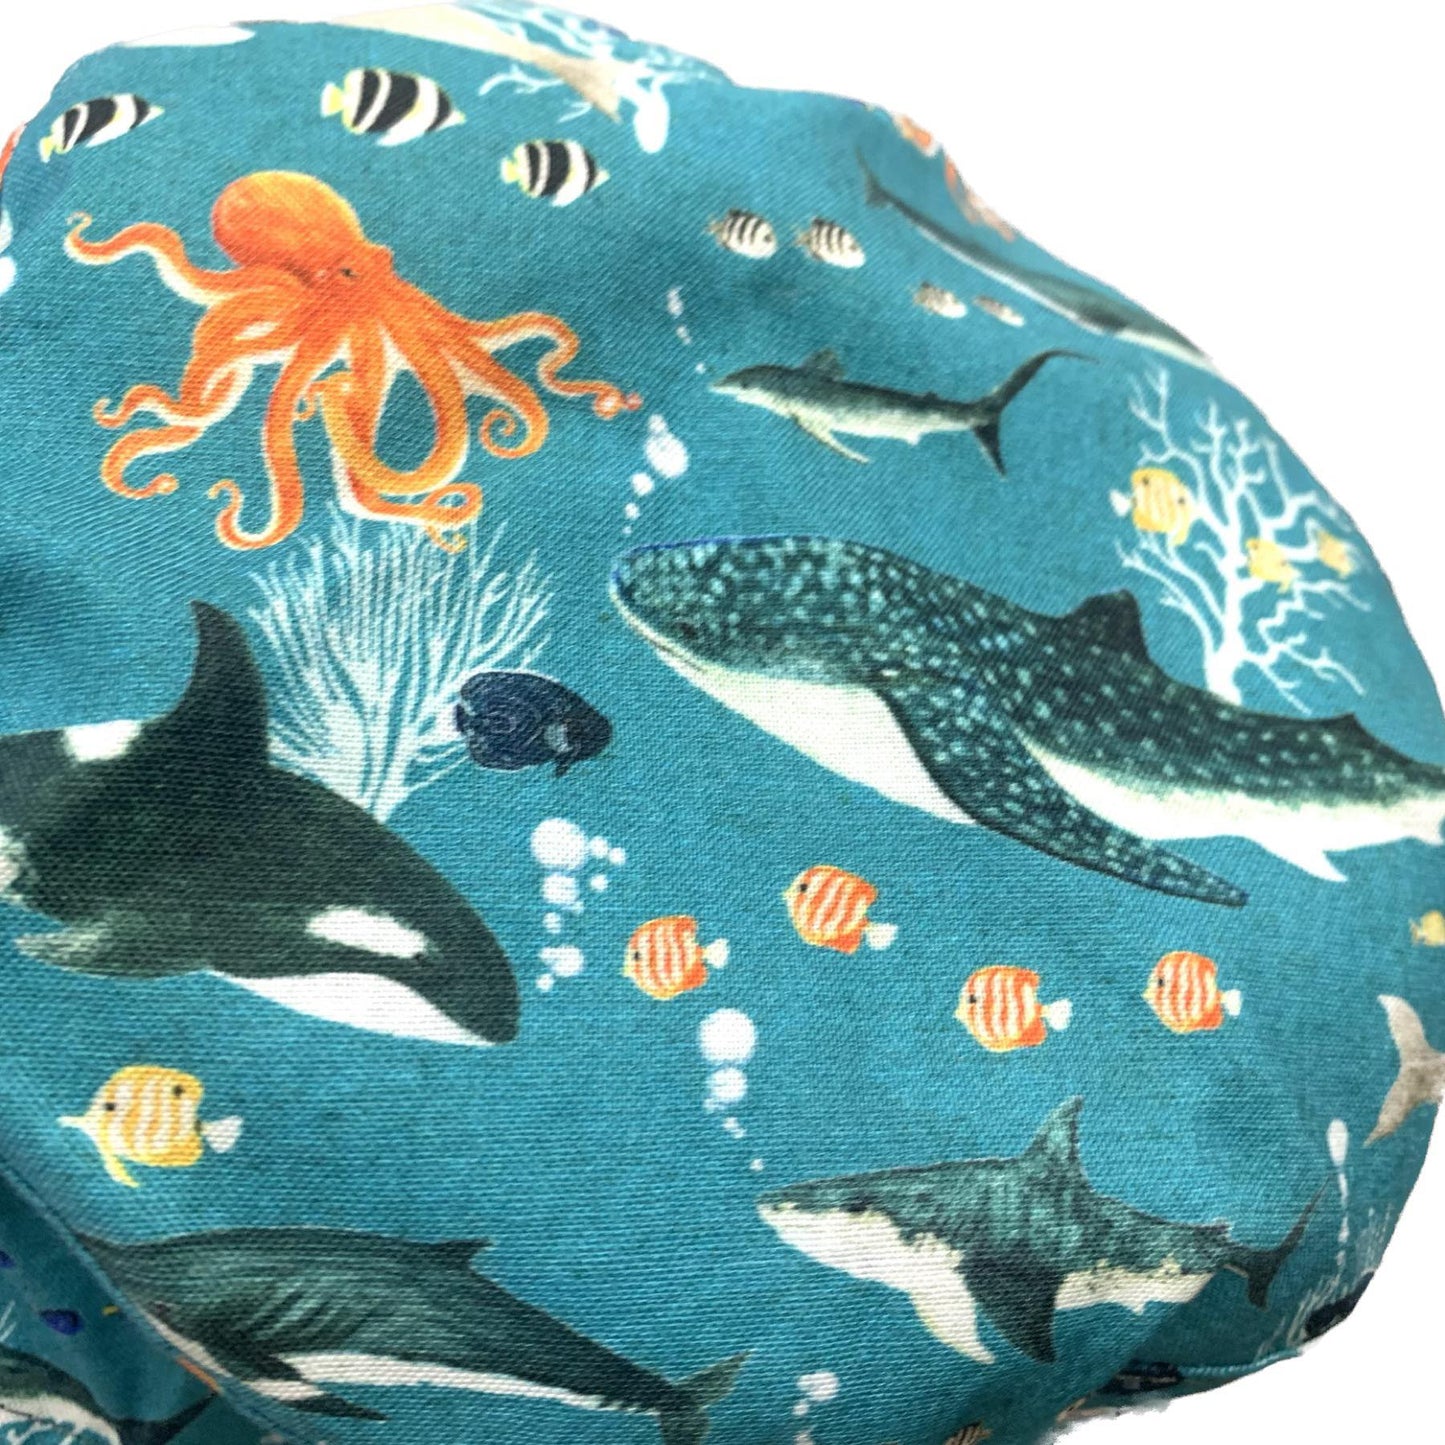 Teacups n Quilts- Sealife Fabric Hat - Adult Size